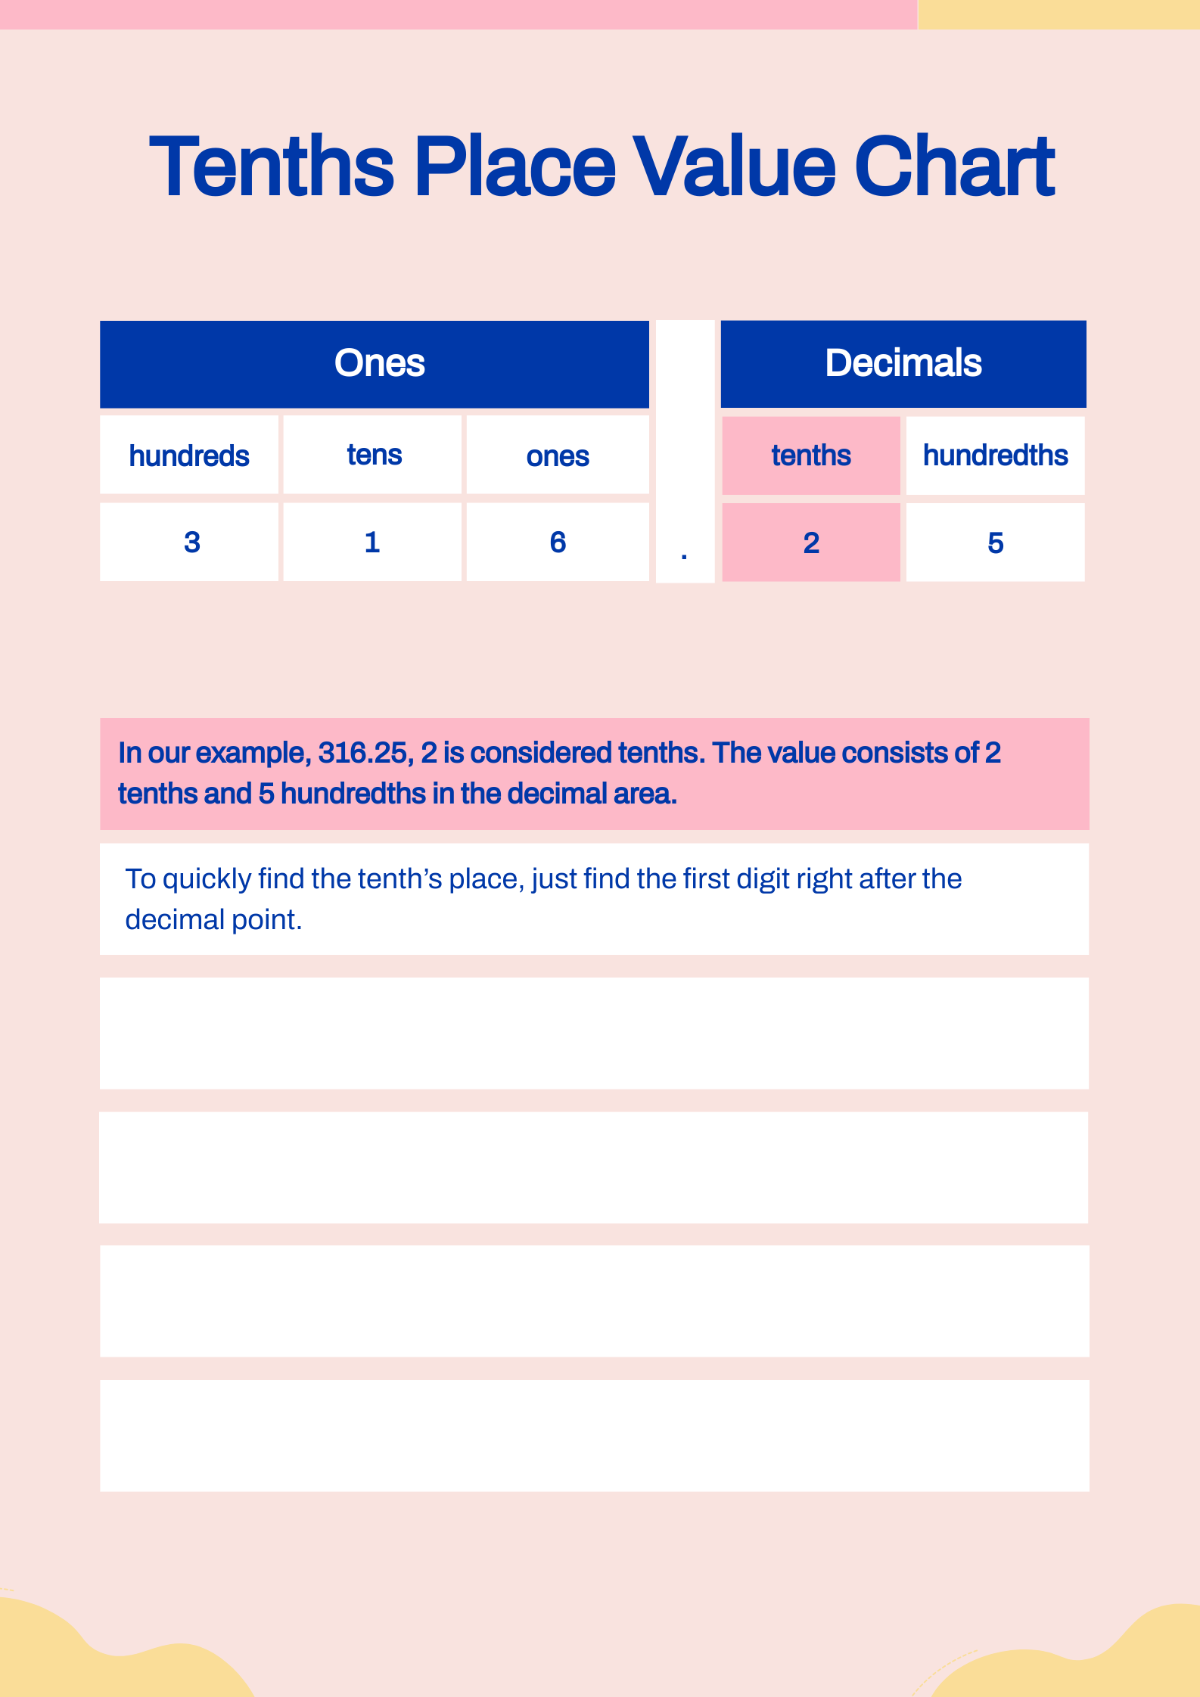 Tenths Place Value Chart Template